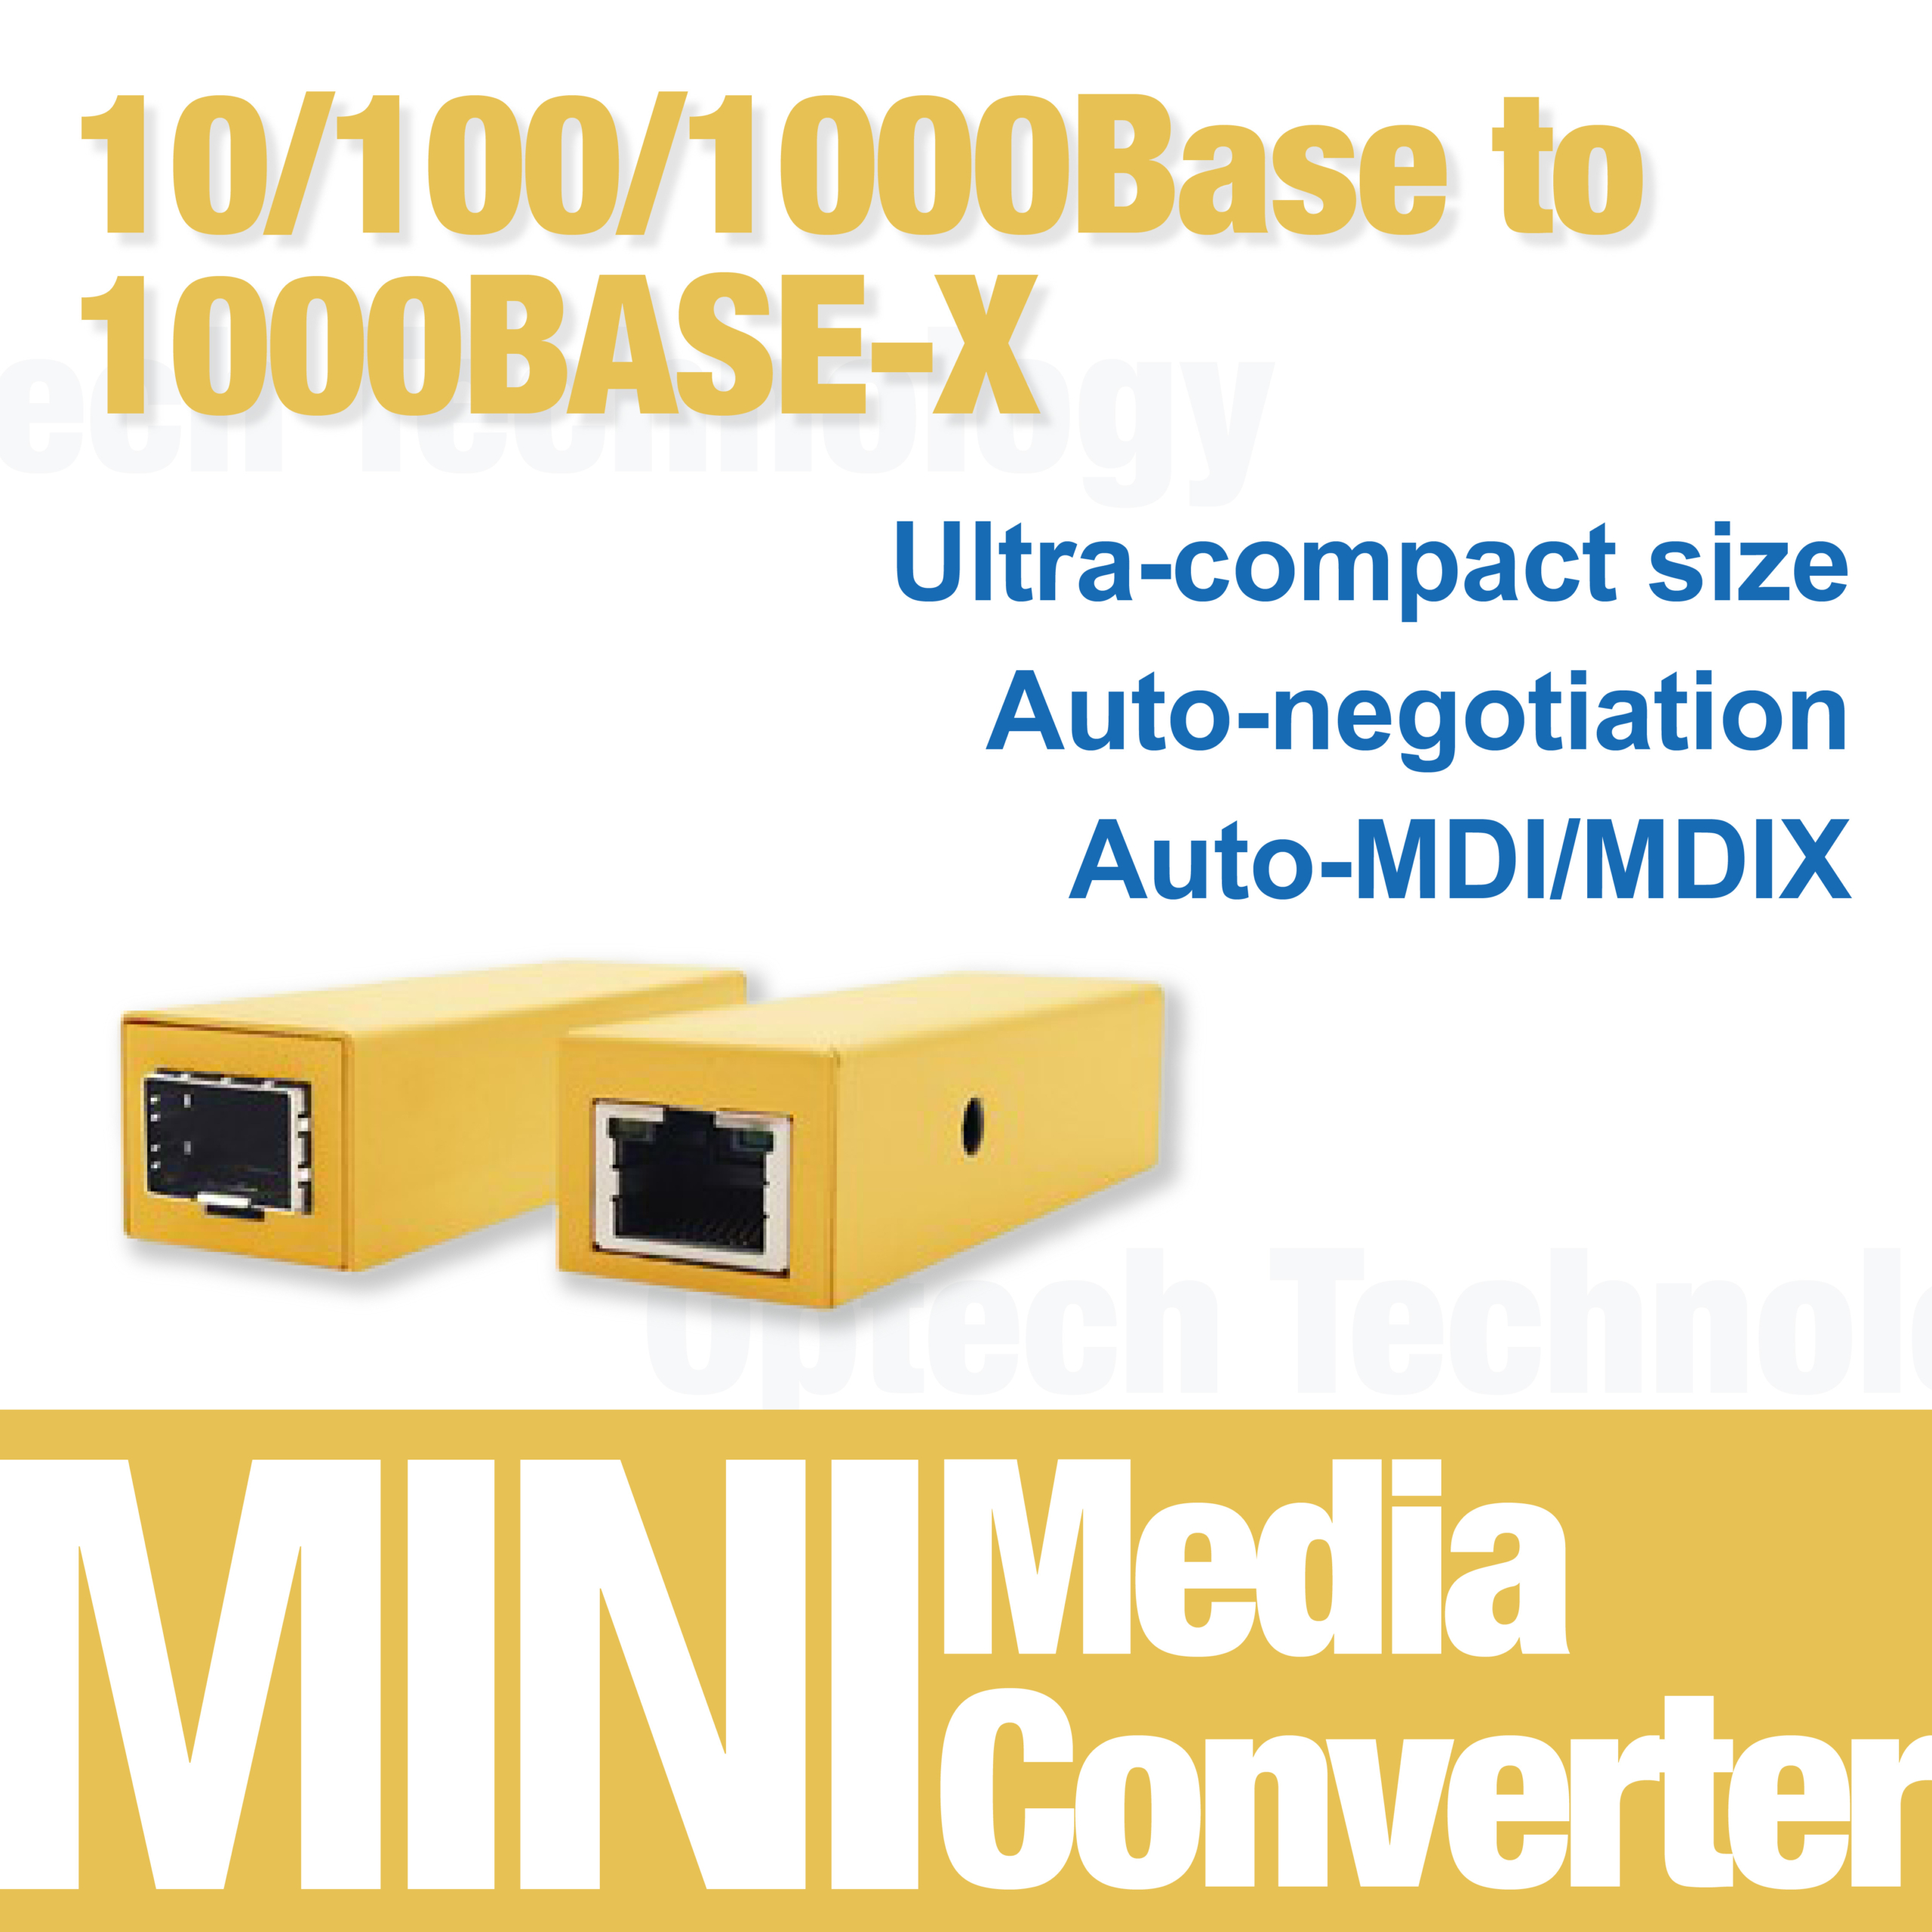 You are currently viewing Mini Media Converter 10/100/1000Base-T RJ45 to 1000Base-X SFP